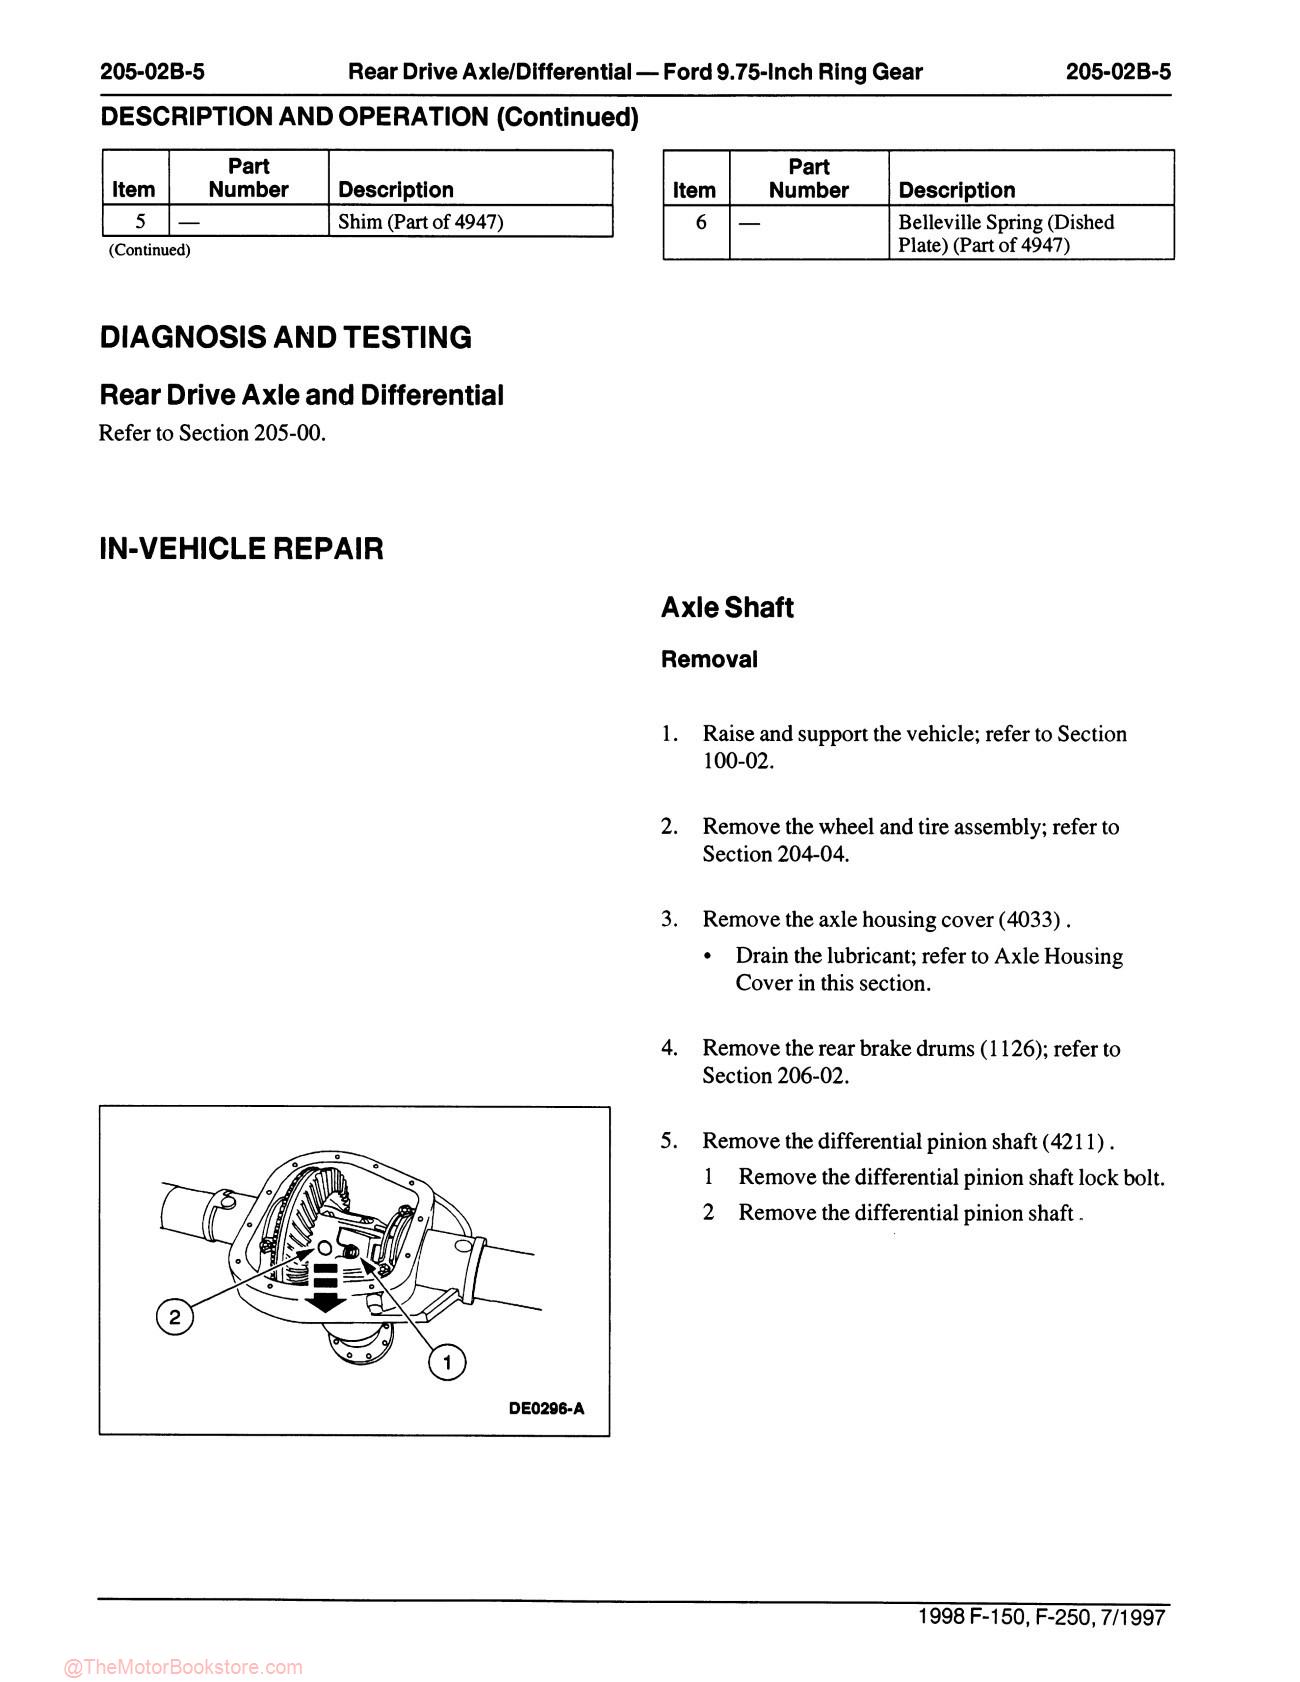 1998 Ford F-150, F-250 Truck Workshop Manual - Sample Page 1